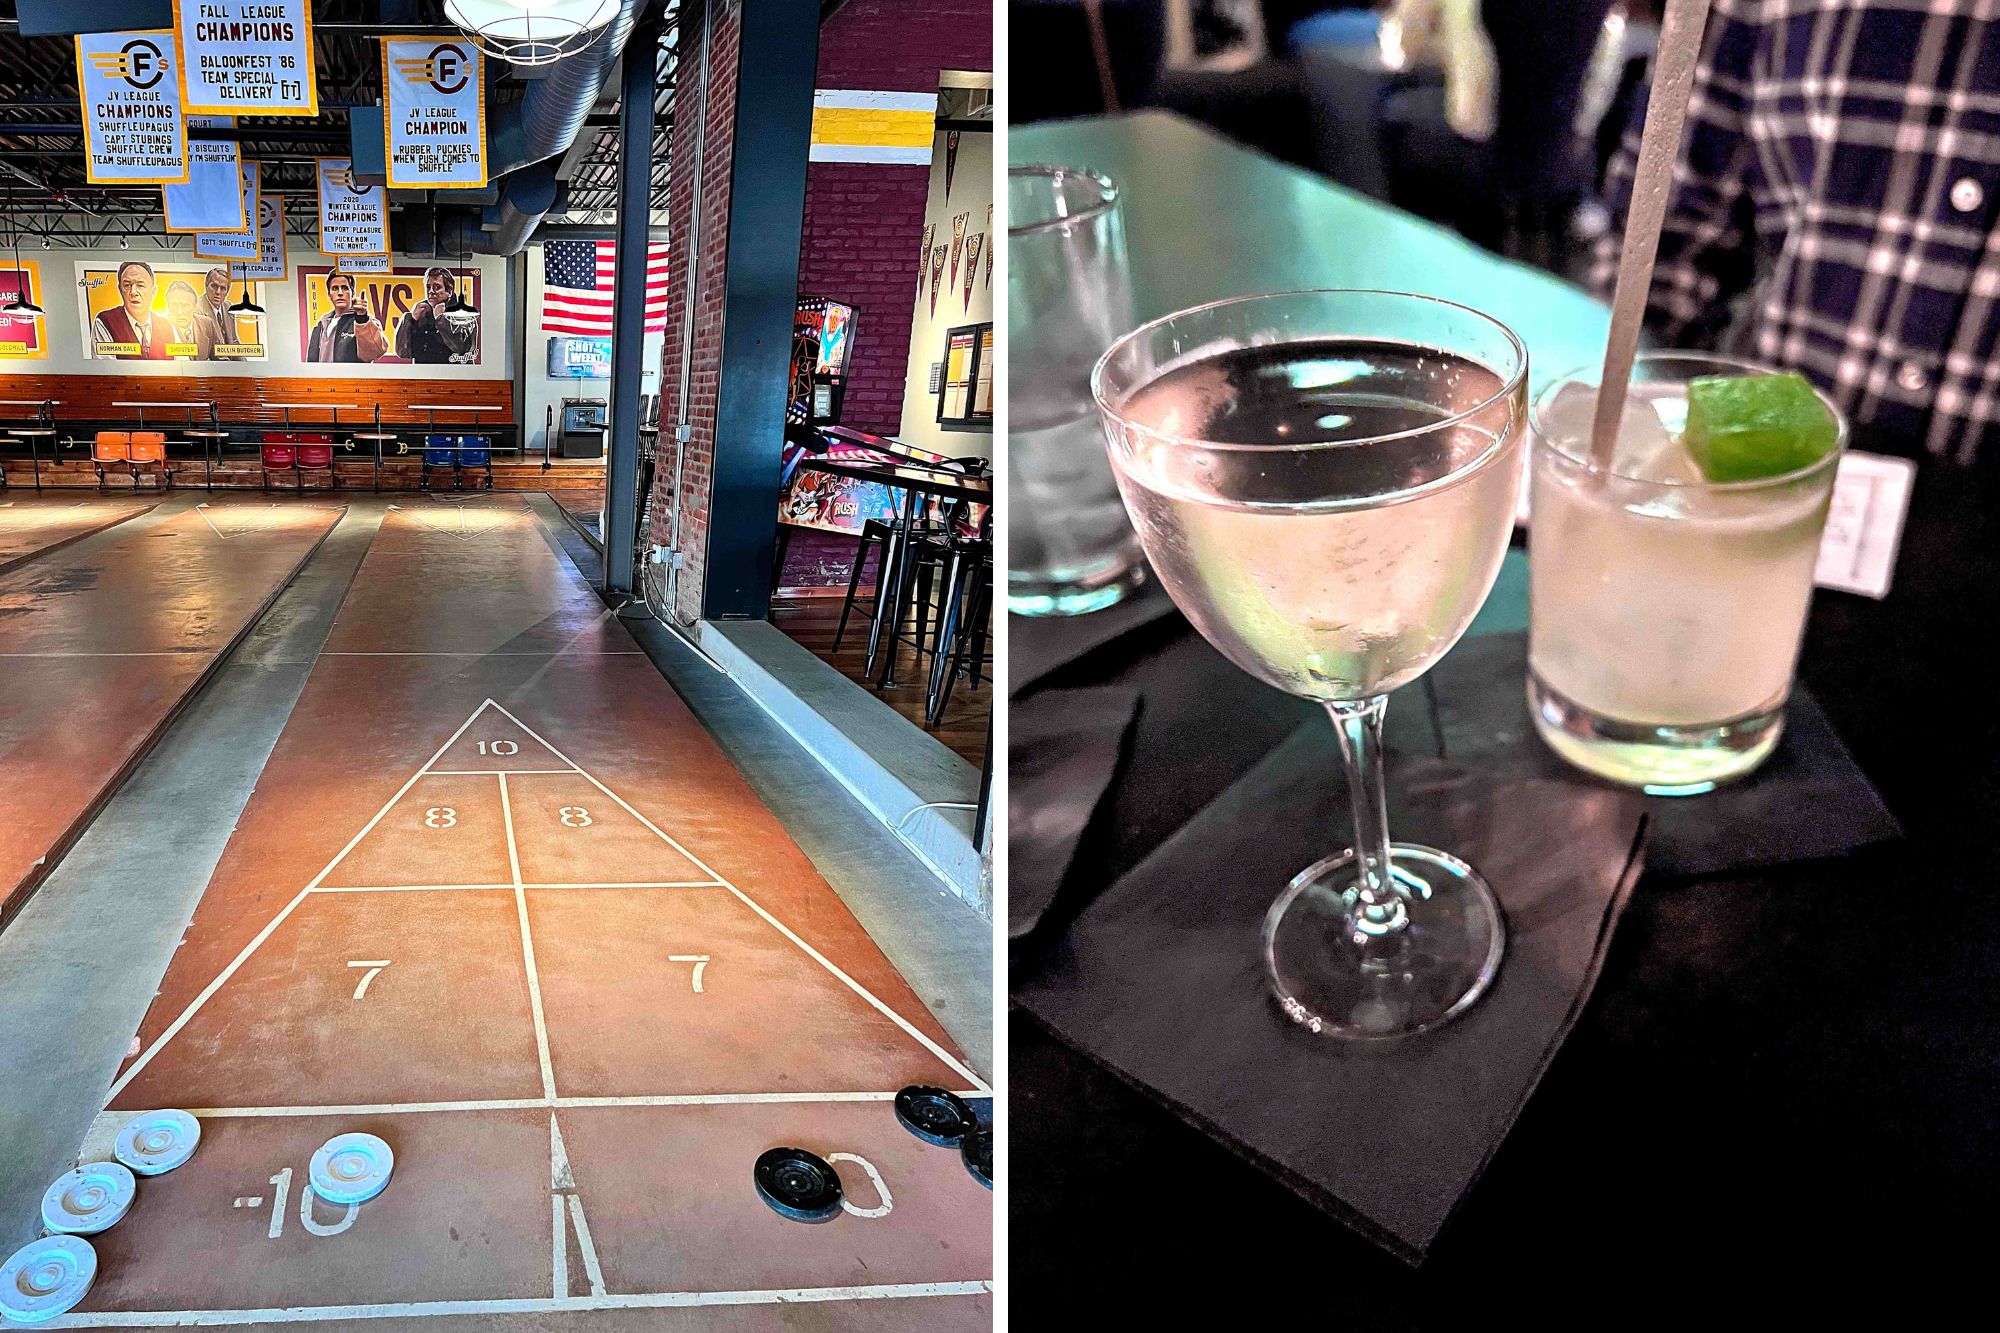 Two images: a shuffleboard lane and a table with cocktails